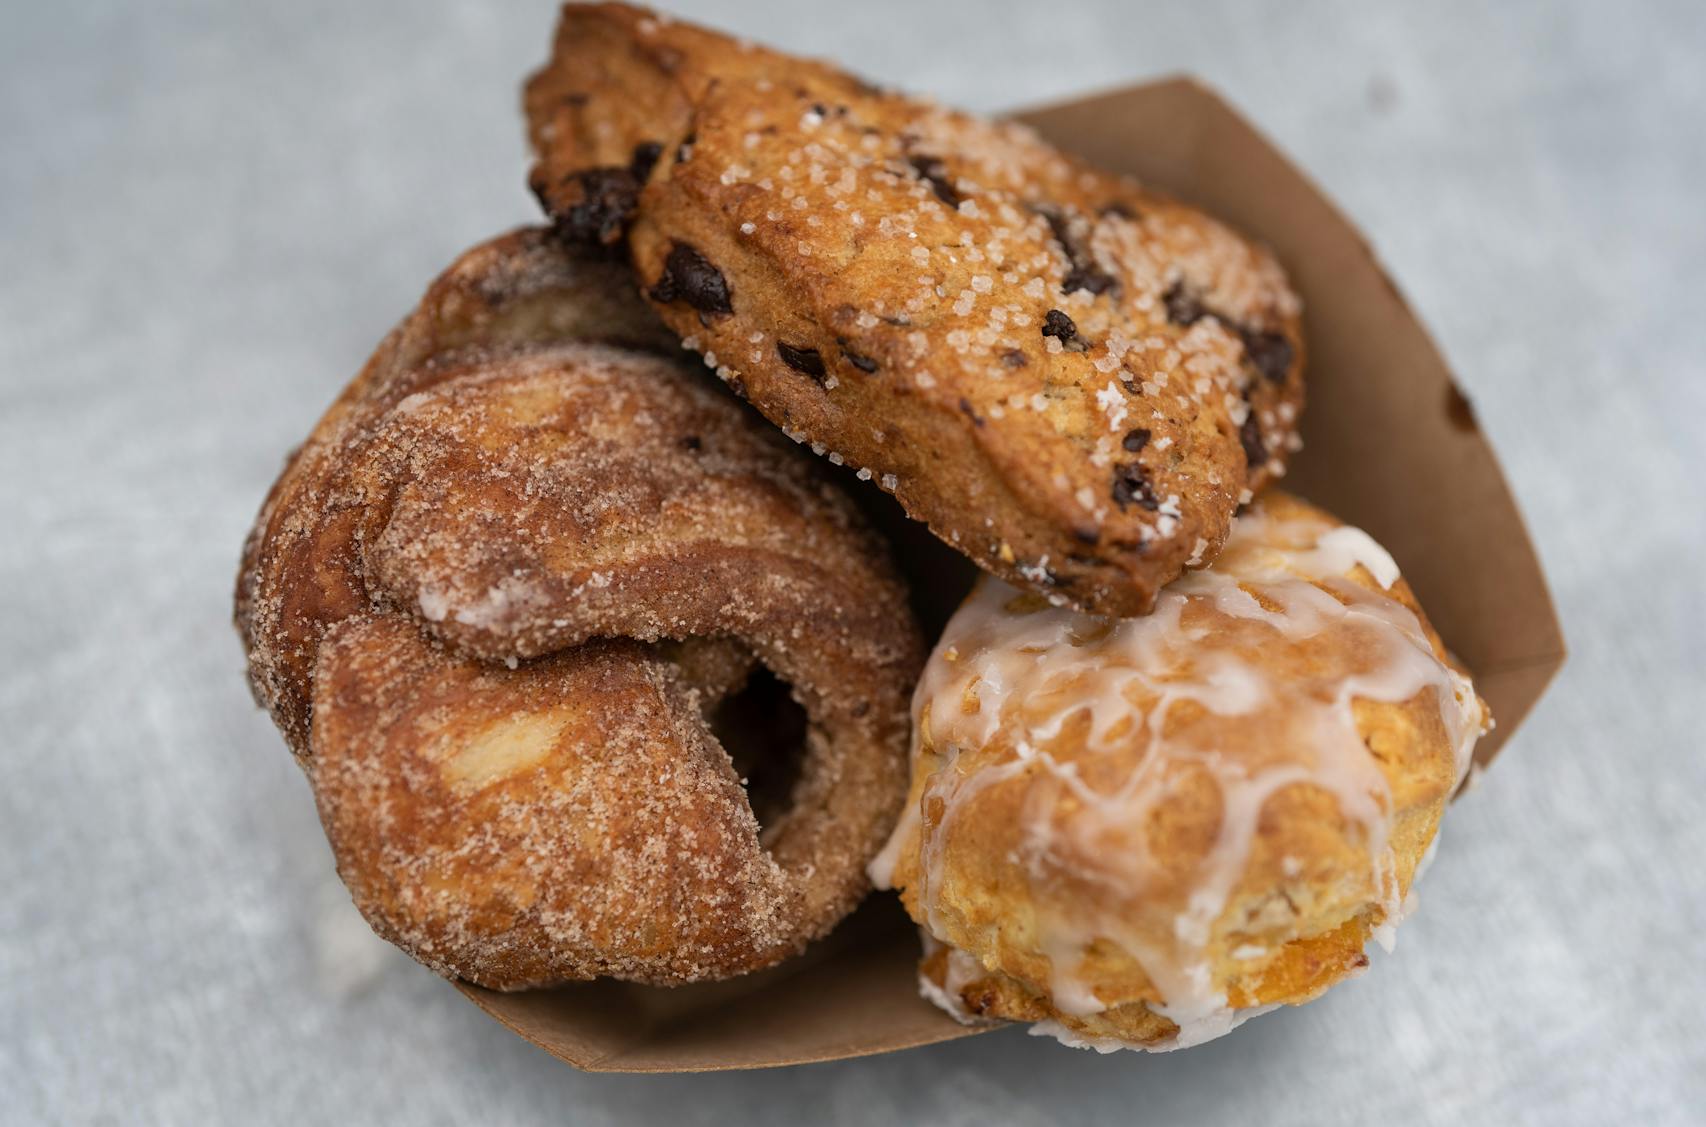 Cinnamon Twist, Chocolate Banana Scone and Apricot Ginger Scone from French Meadow. New foods at the Minnesota State Fair photographed on Thursday, Aug. 25, 2022 in Falcon Heights, Minn. ] RENEE JONES SCHNEIDER • renee.jones@startribune.com